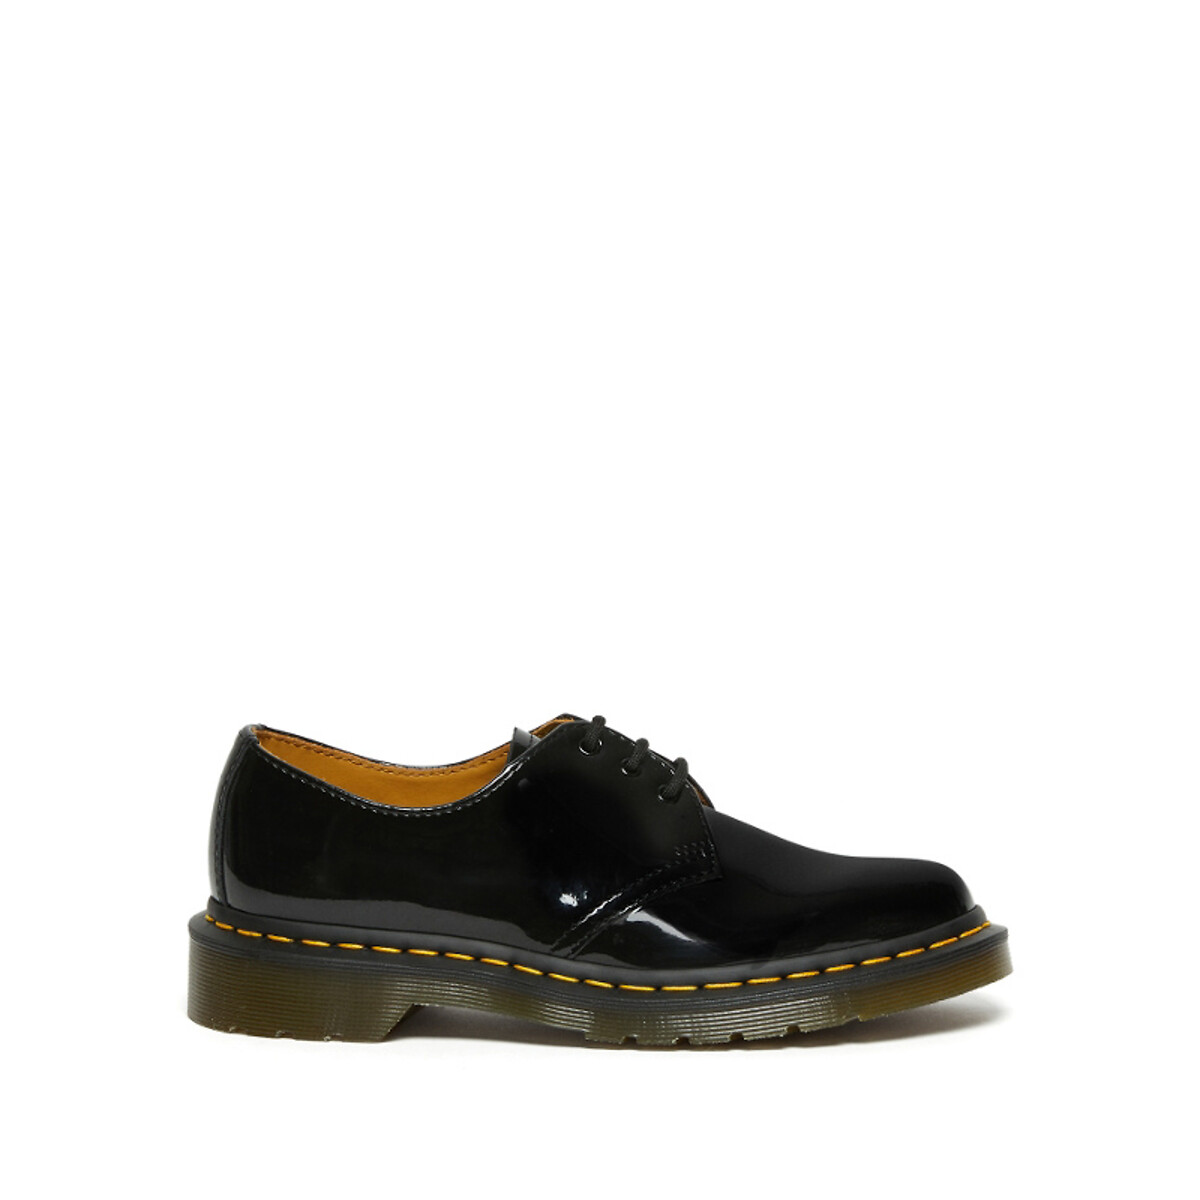 1461 Patent Leather Brogues